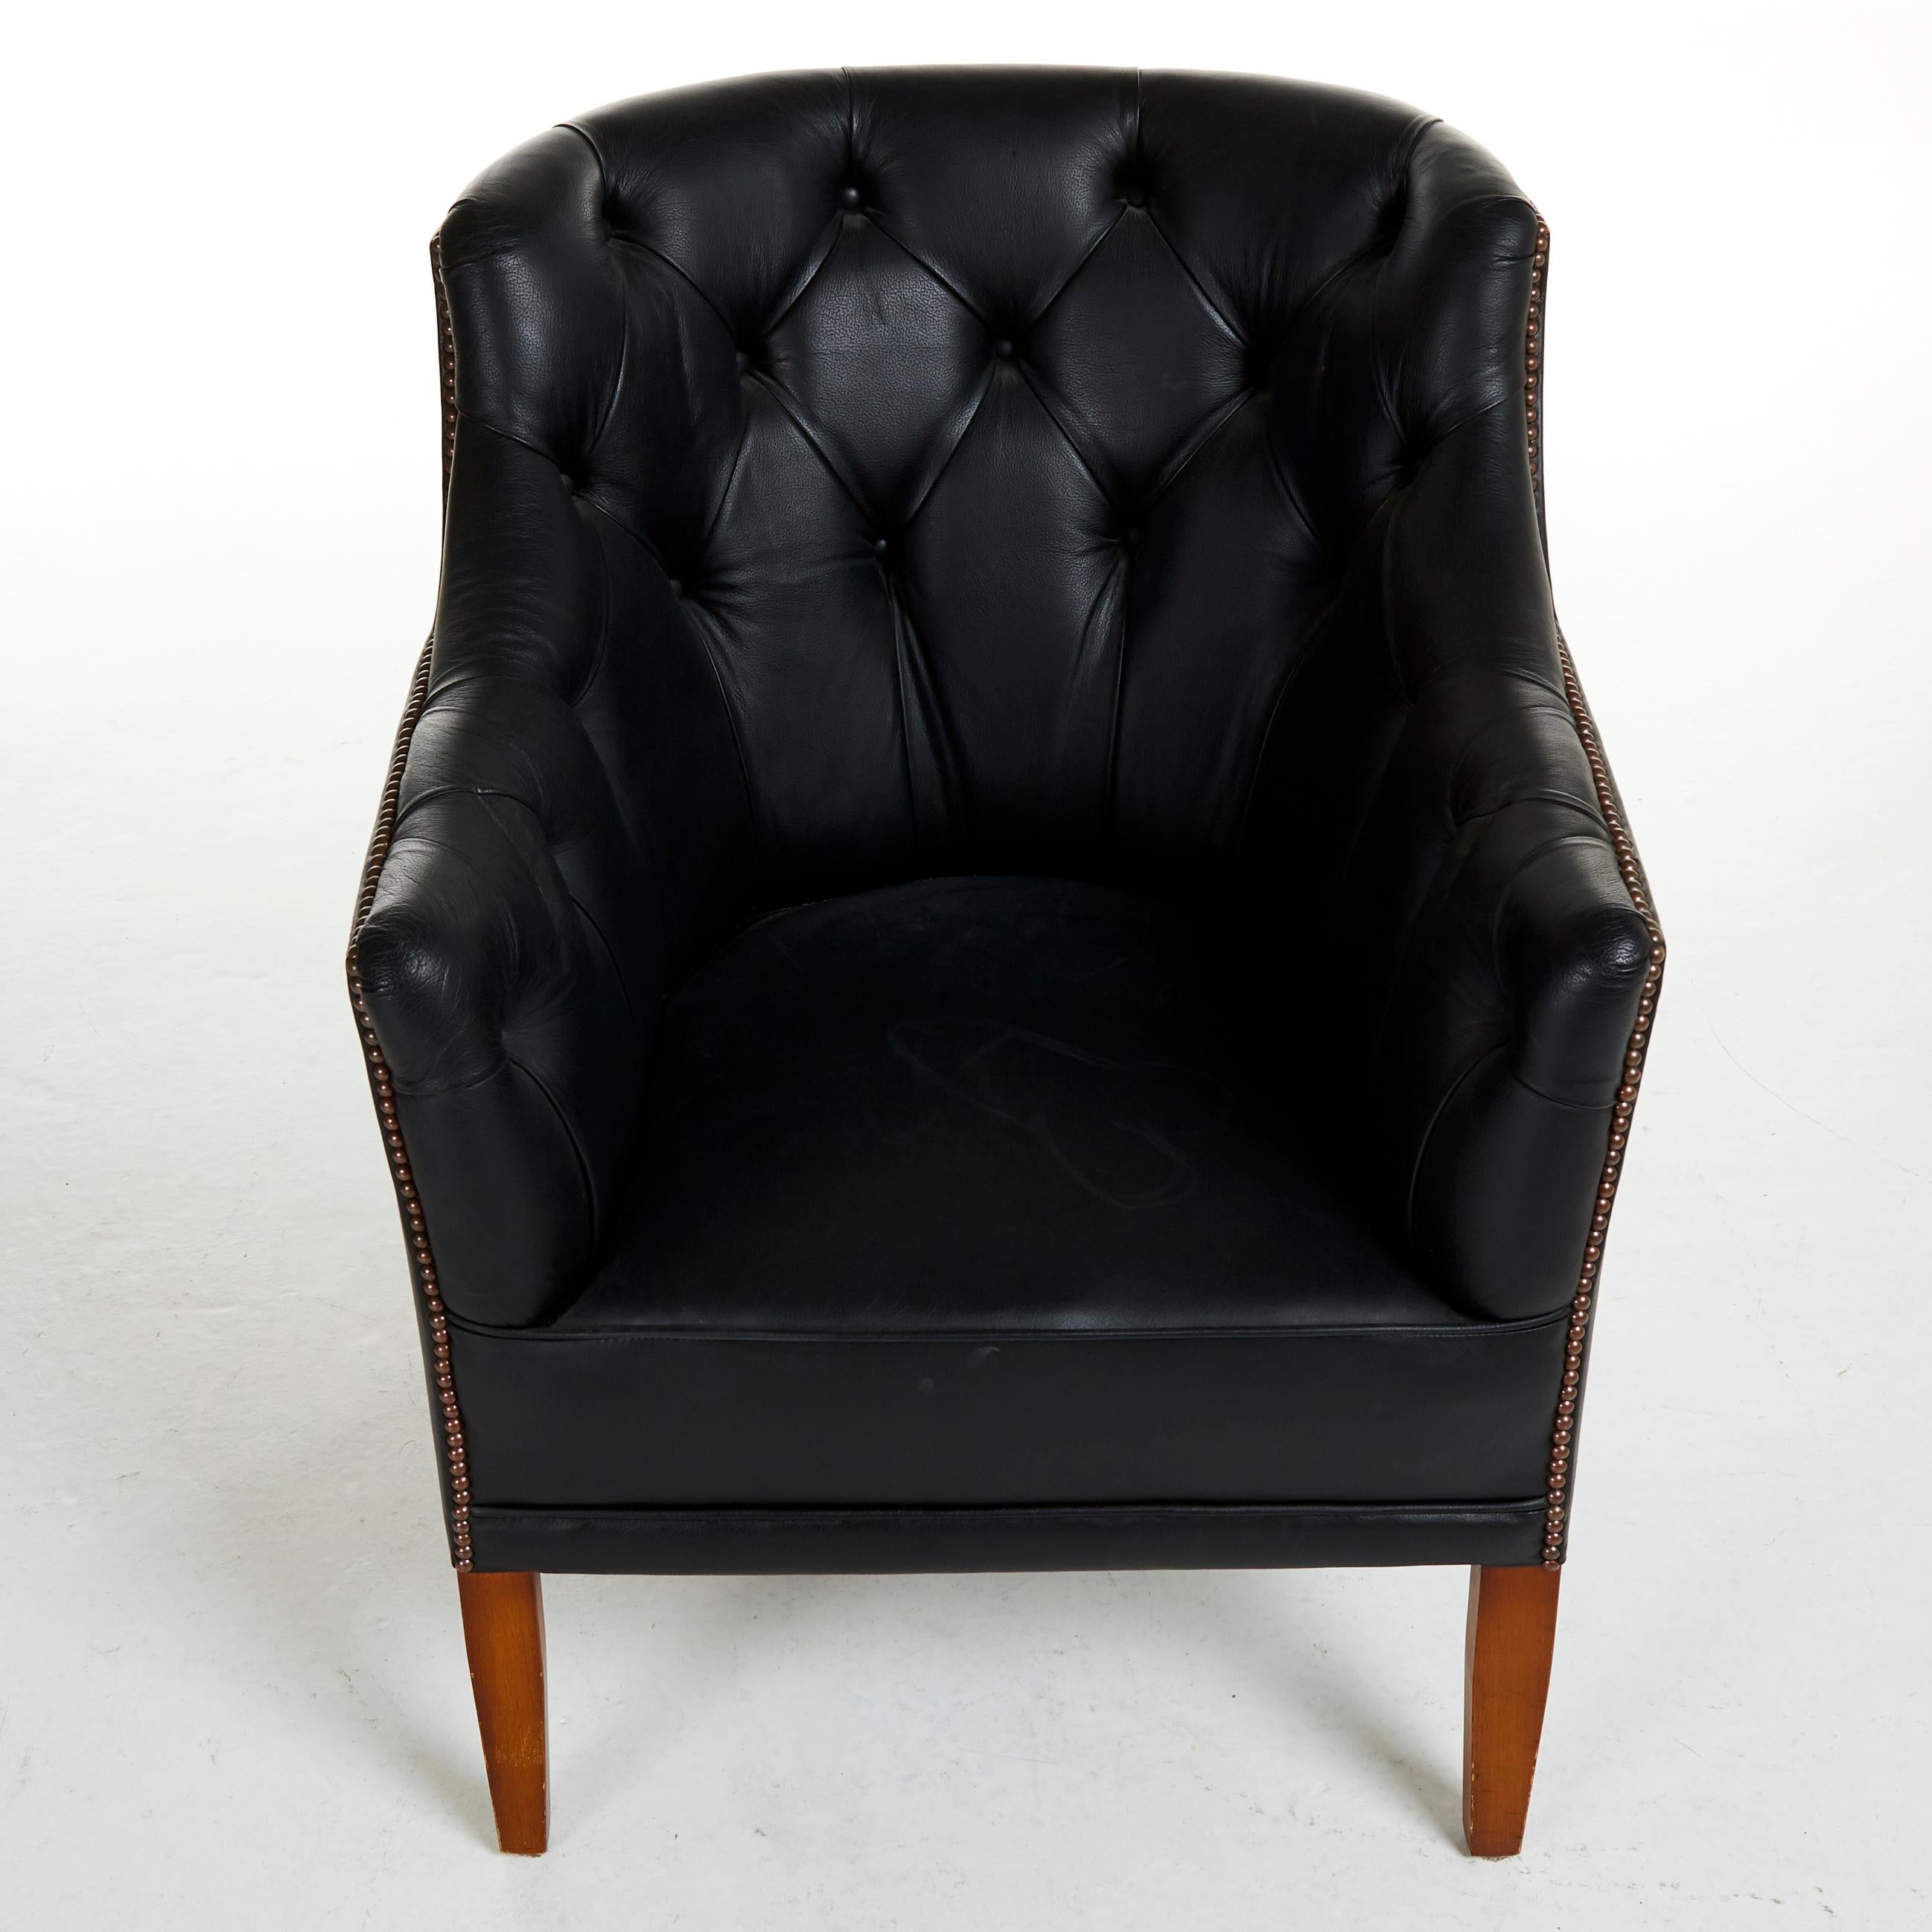 Armchair, around mid-1900s, mahogany legs, deep-stitched upholstery in black leather, pearl-spiked décor.


